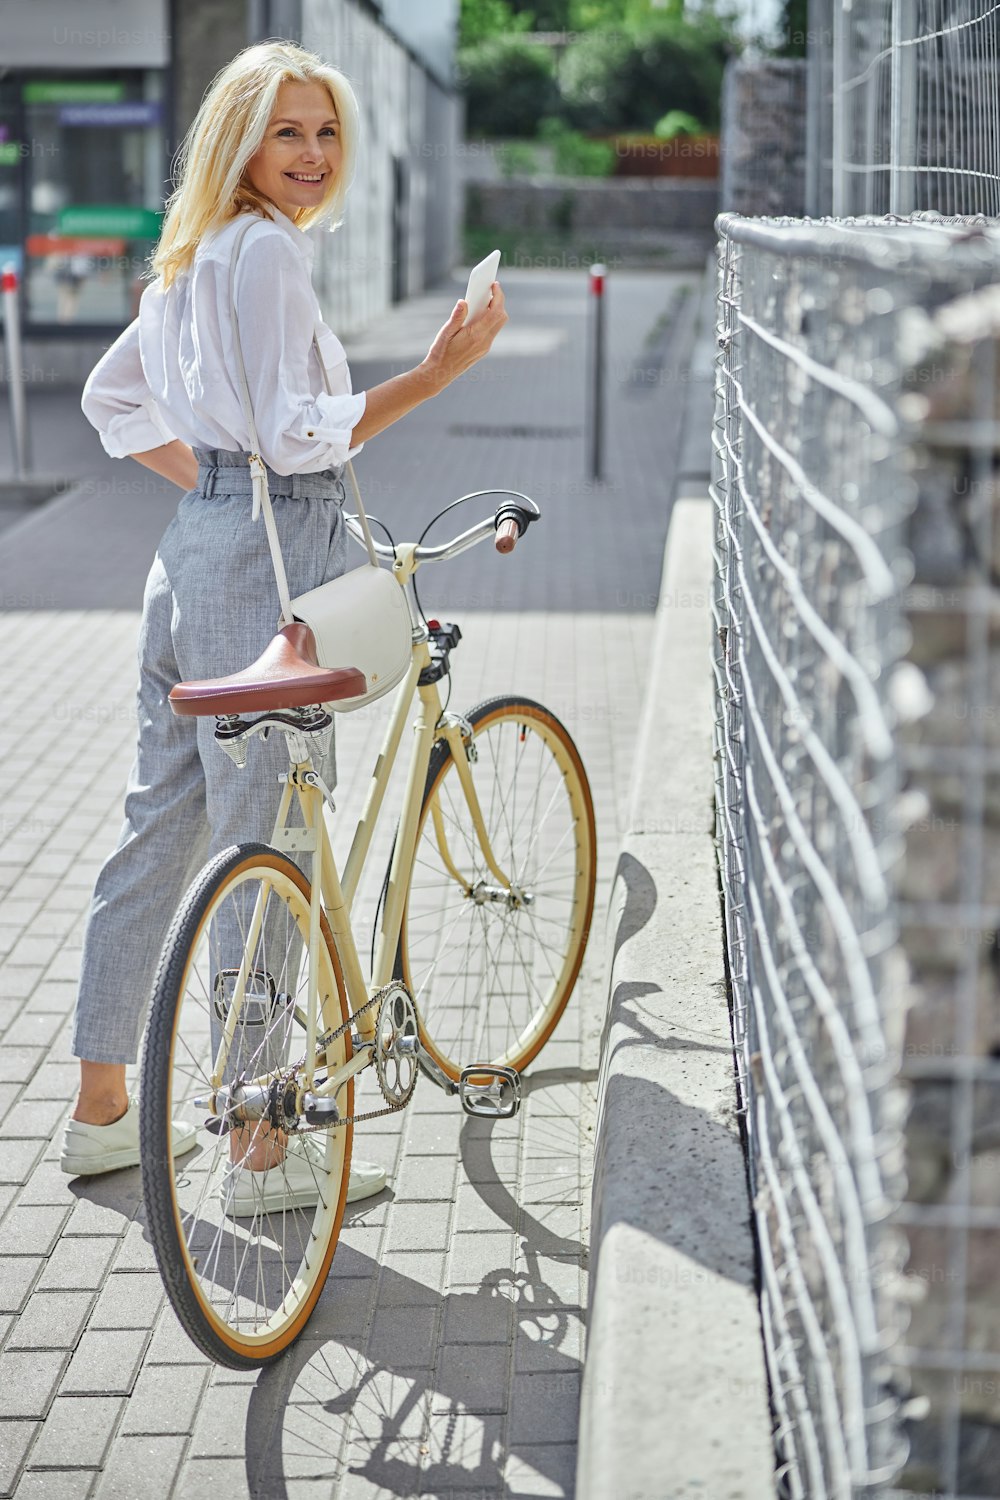 Full length portrait of happy smiling blonde woman with yellow retro bike walking in the city